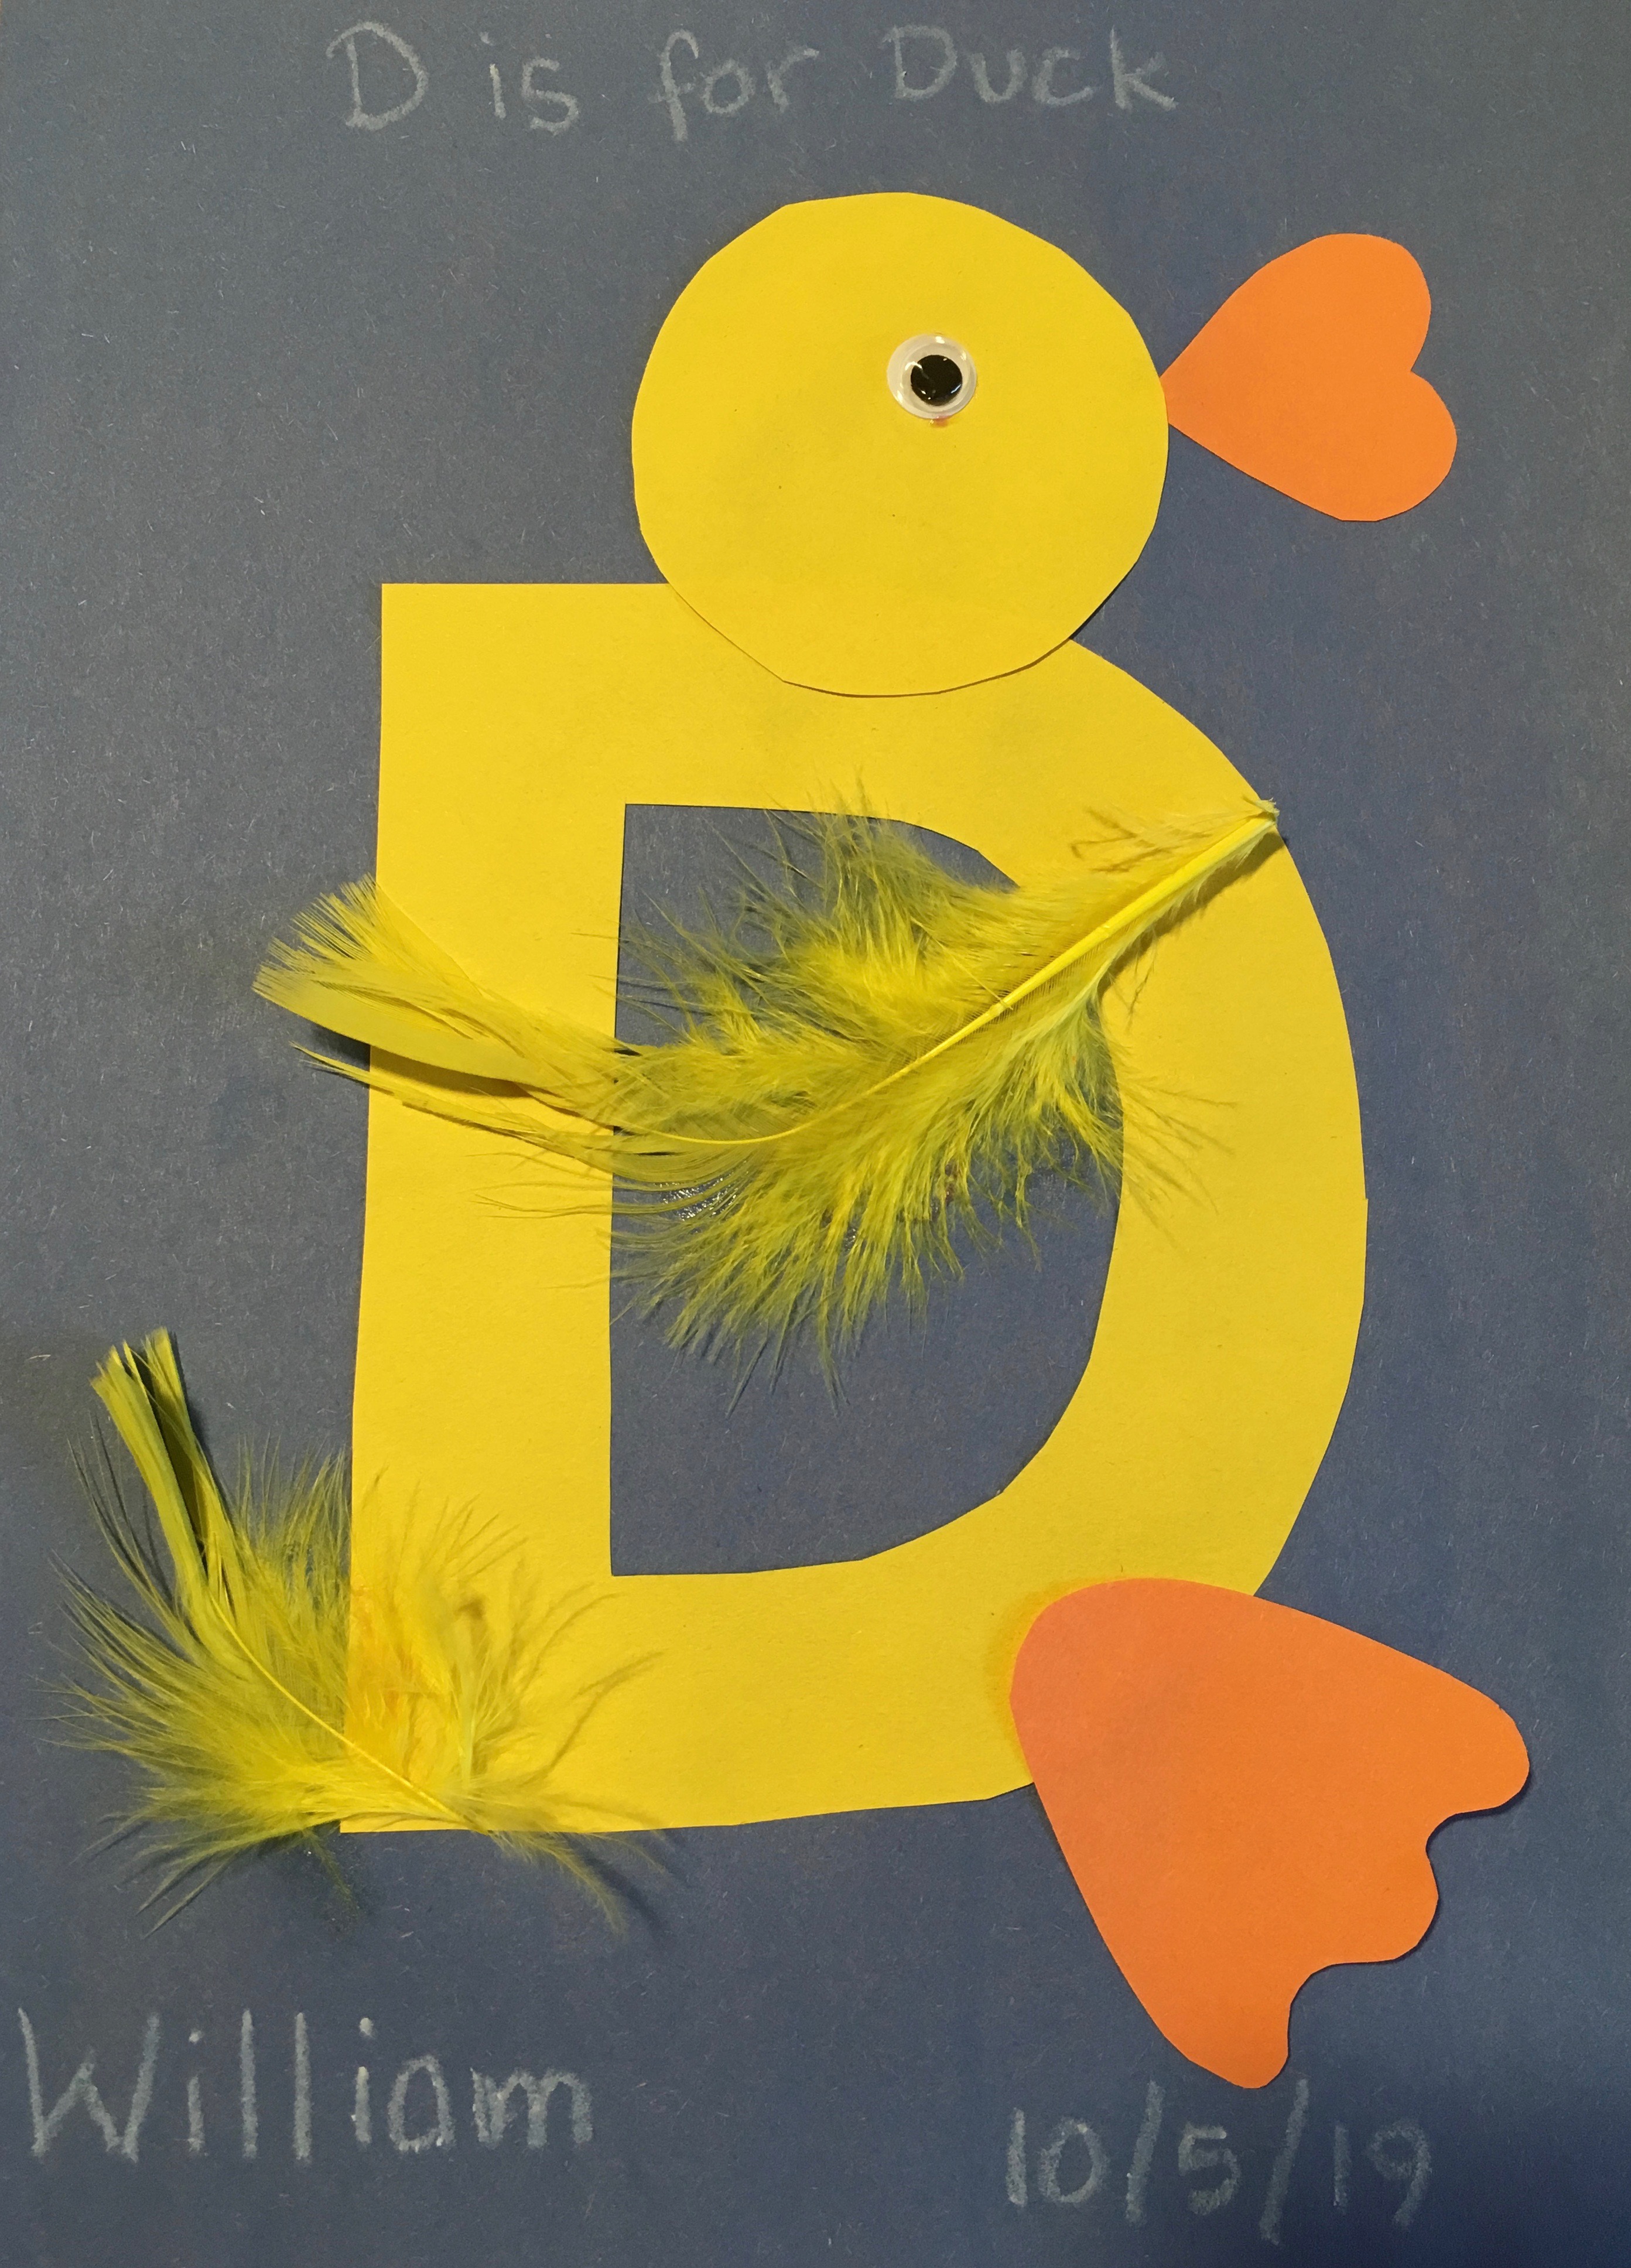 D is for Duck | Tag Sis, You're It!